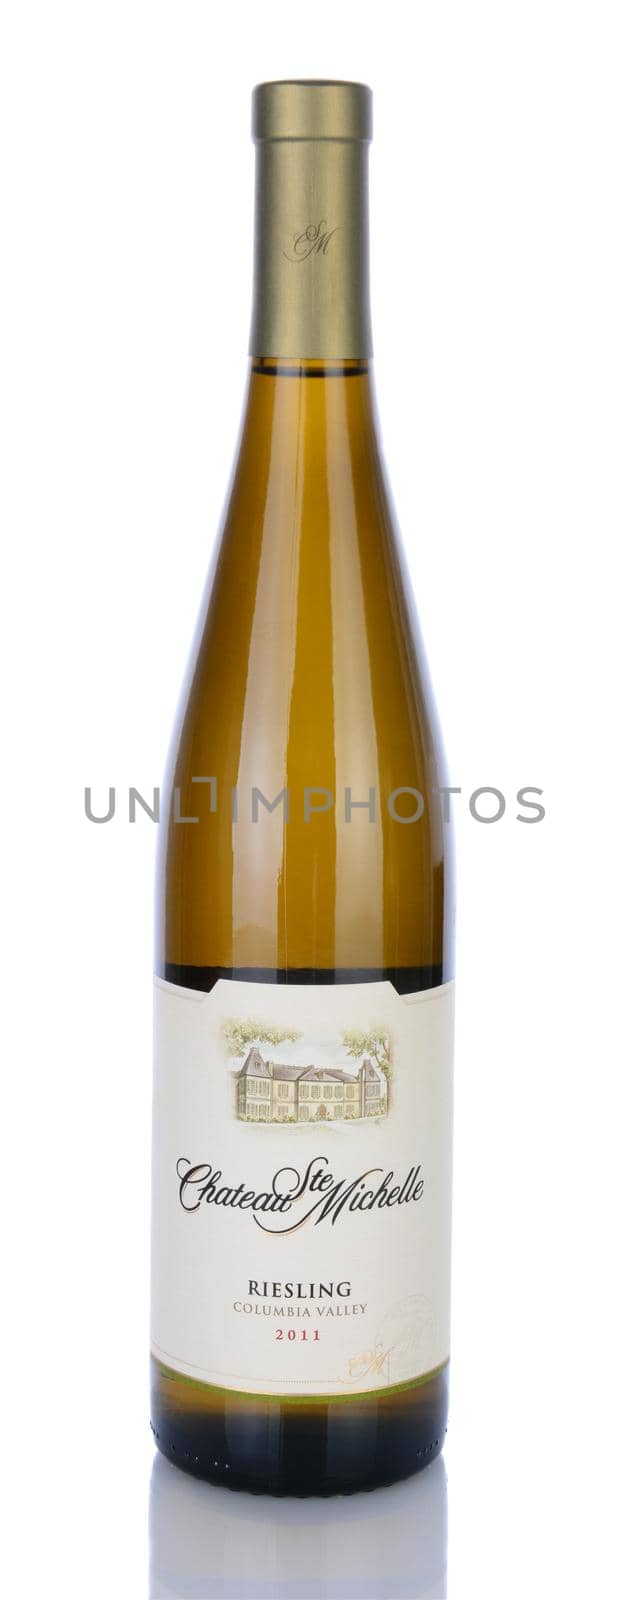 IRVINE, CA - January 29, 2014: A bottle of 2011 Chateau Ste Michelle Riesling. This award winning winery in Woodinville, Washington is the states oldest, known for Chardonnay, Merlot and Riesling.